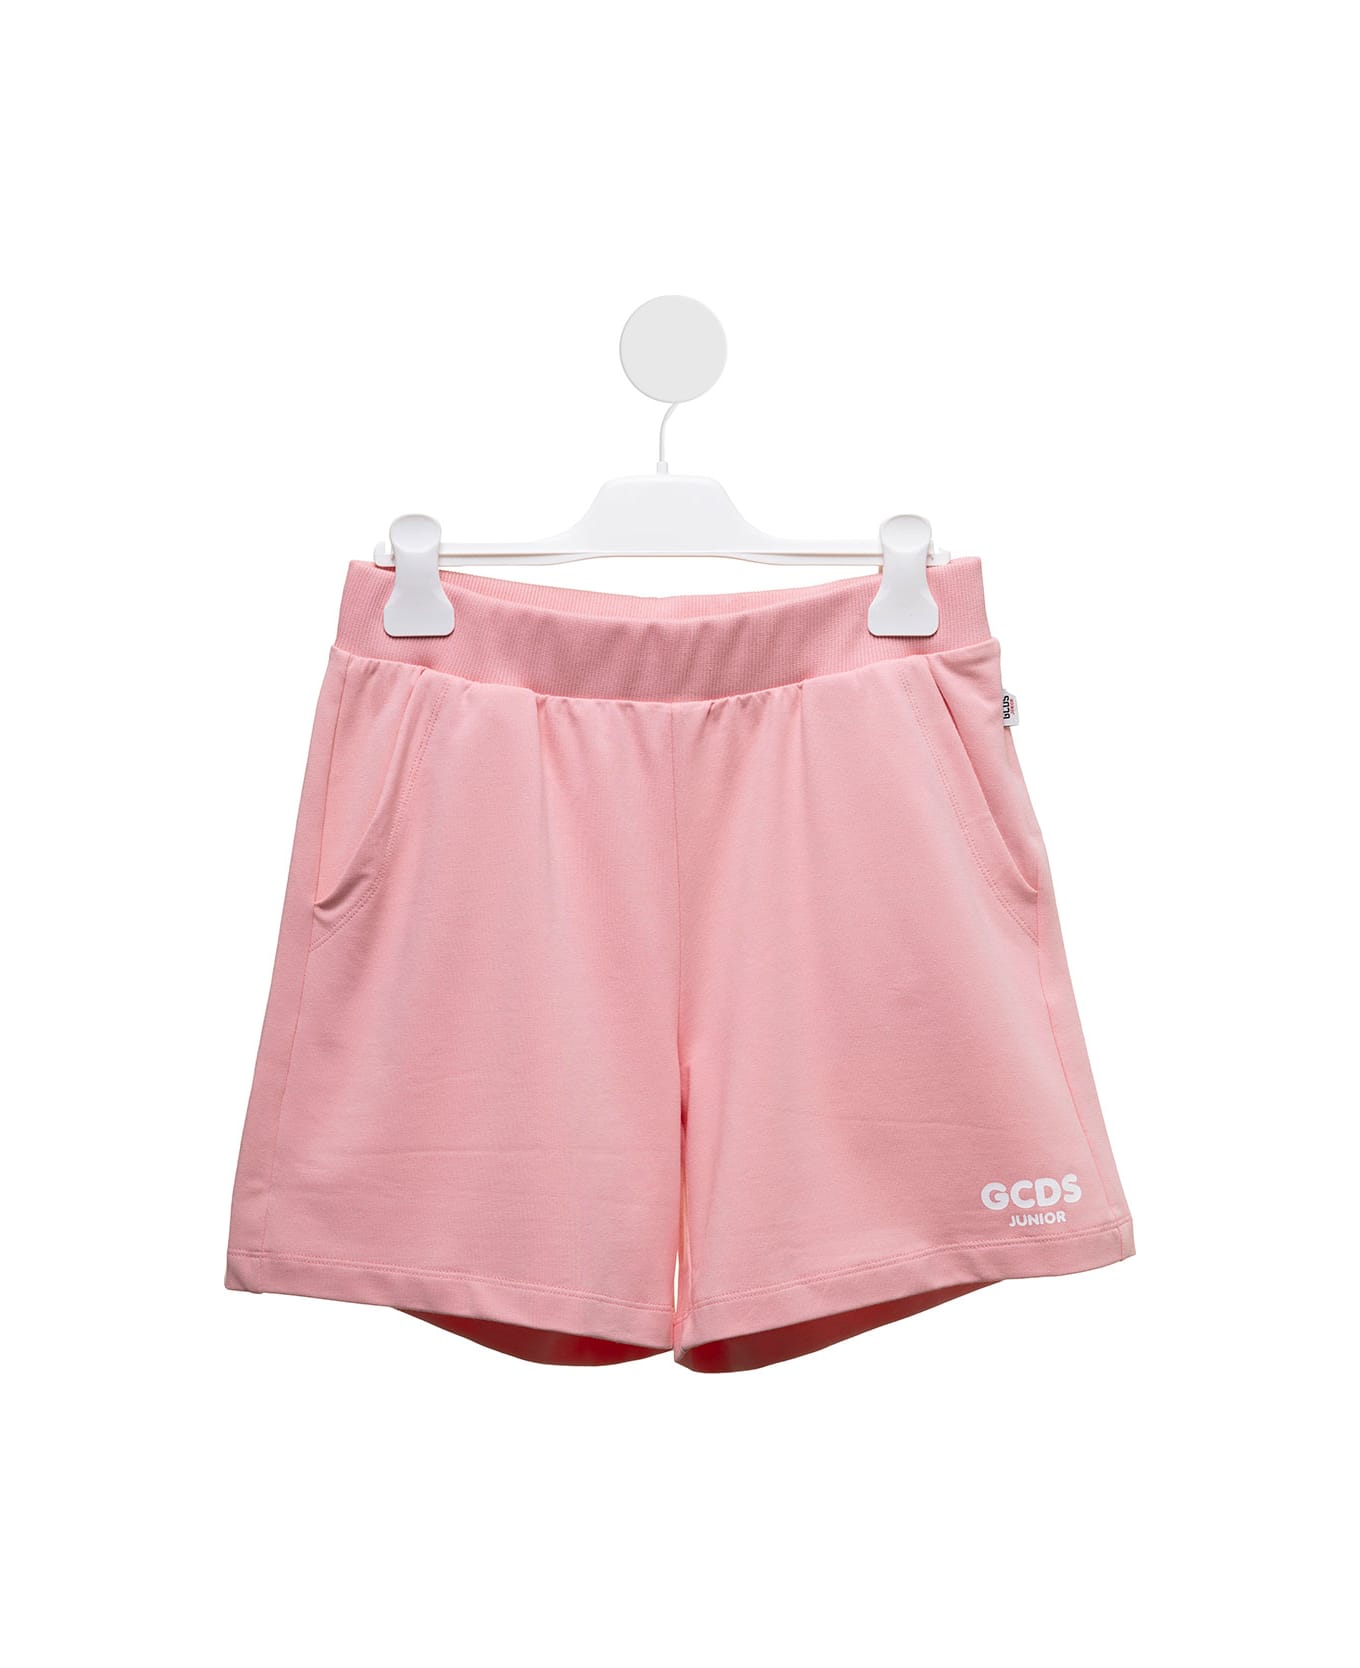 GCDS Mini Gds Girl's Pink Cotton Shorts With Logo - Pink